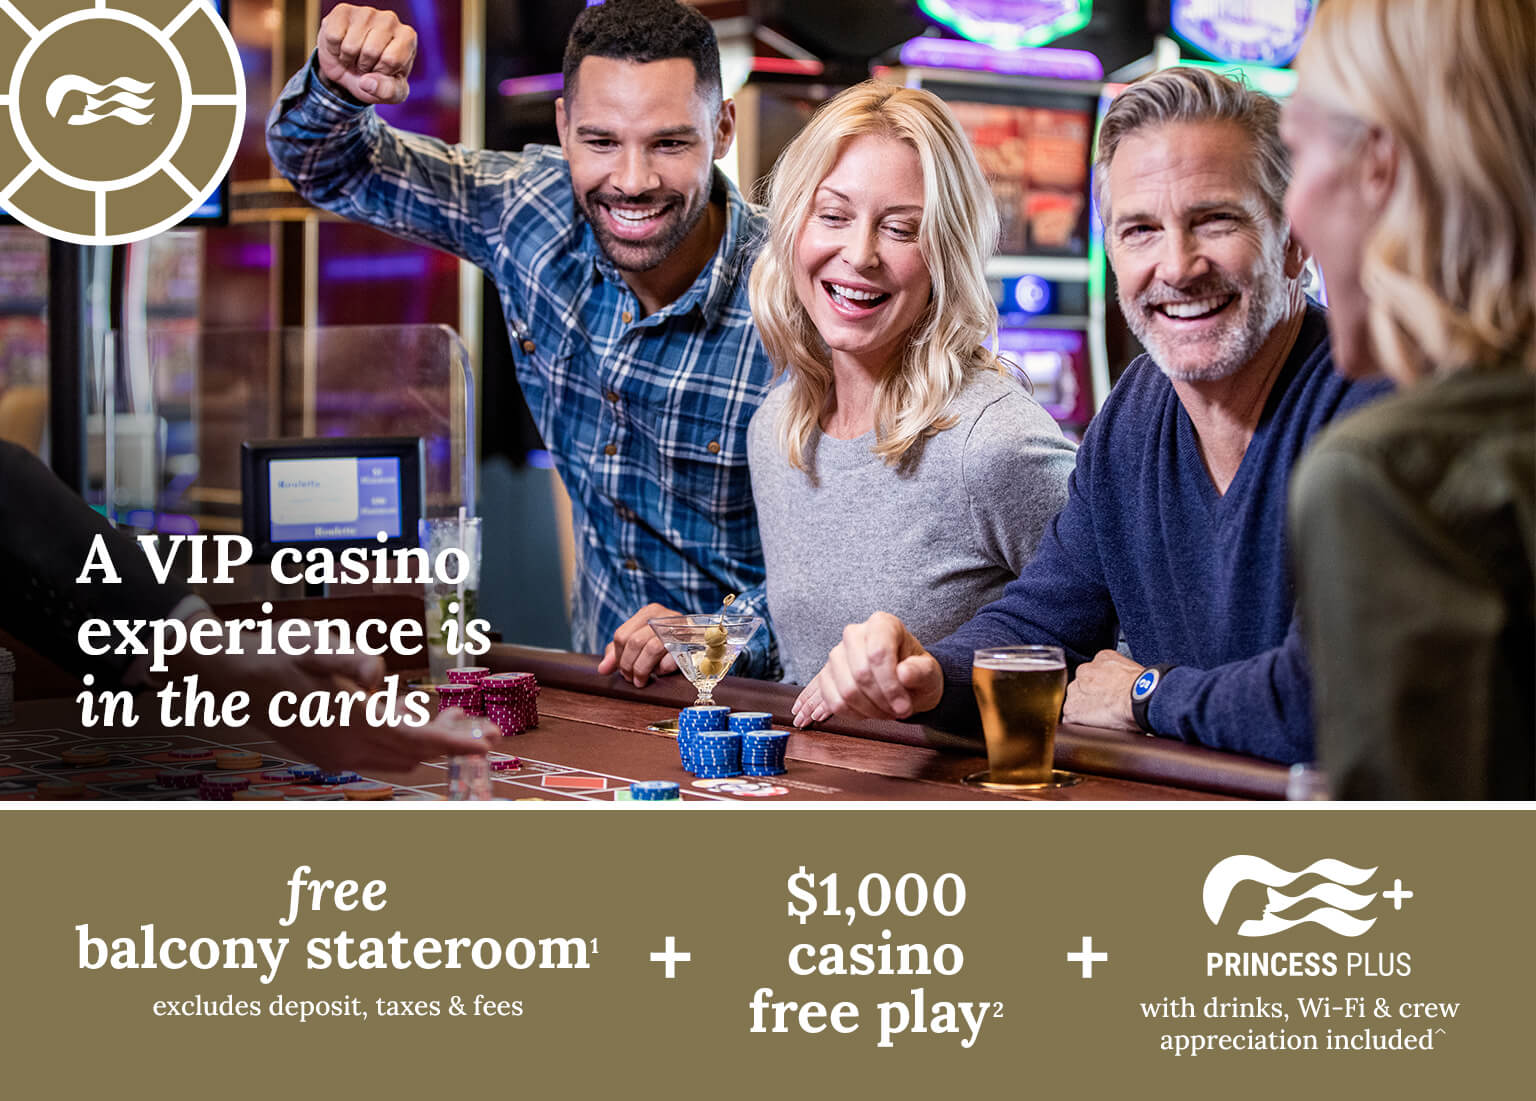 A VIP casino experience is in the cards. Free balcony stateroom + $1000 casino free play + princess plus with drinks, Wi-Fi, and crew appreciation included. Click here to book.